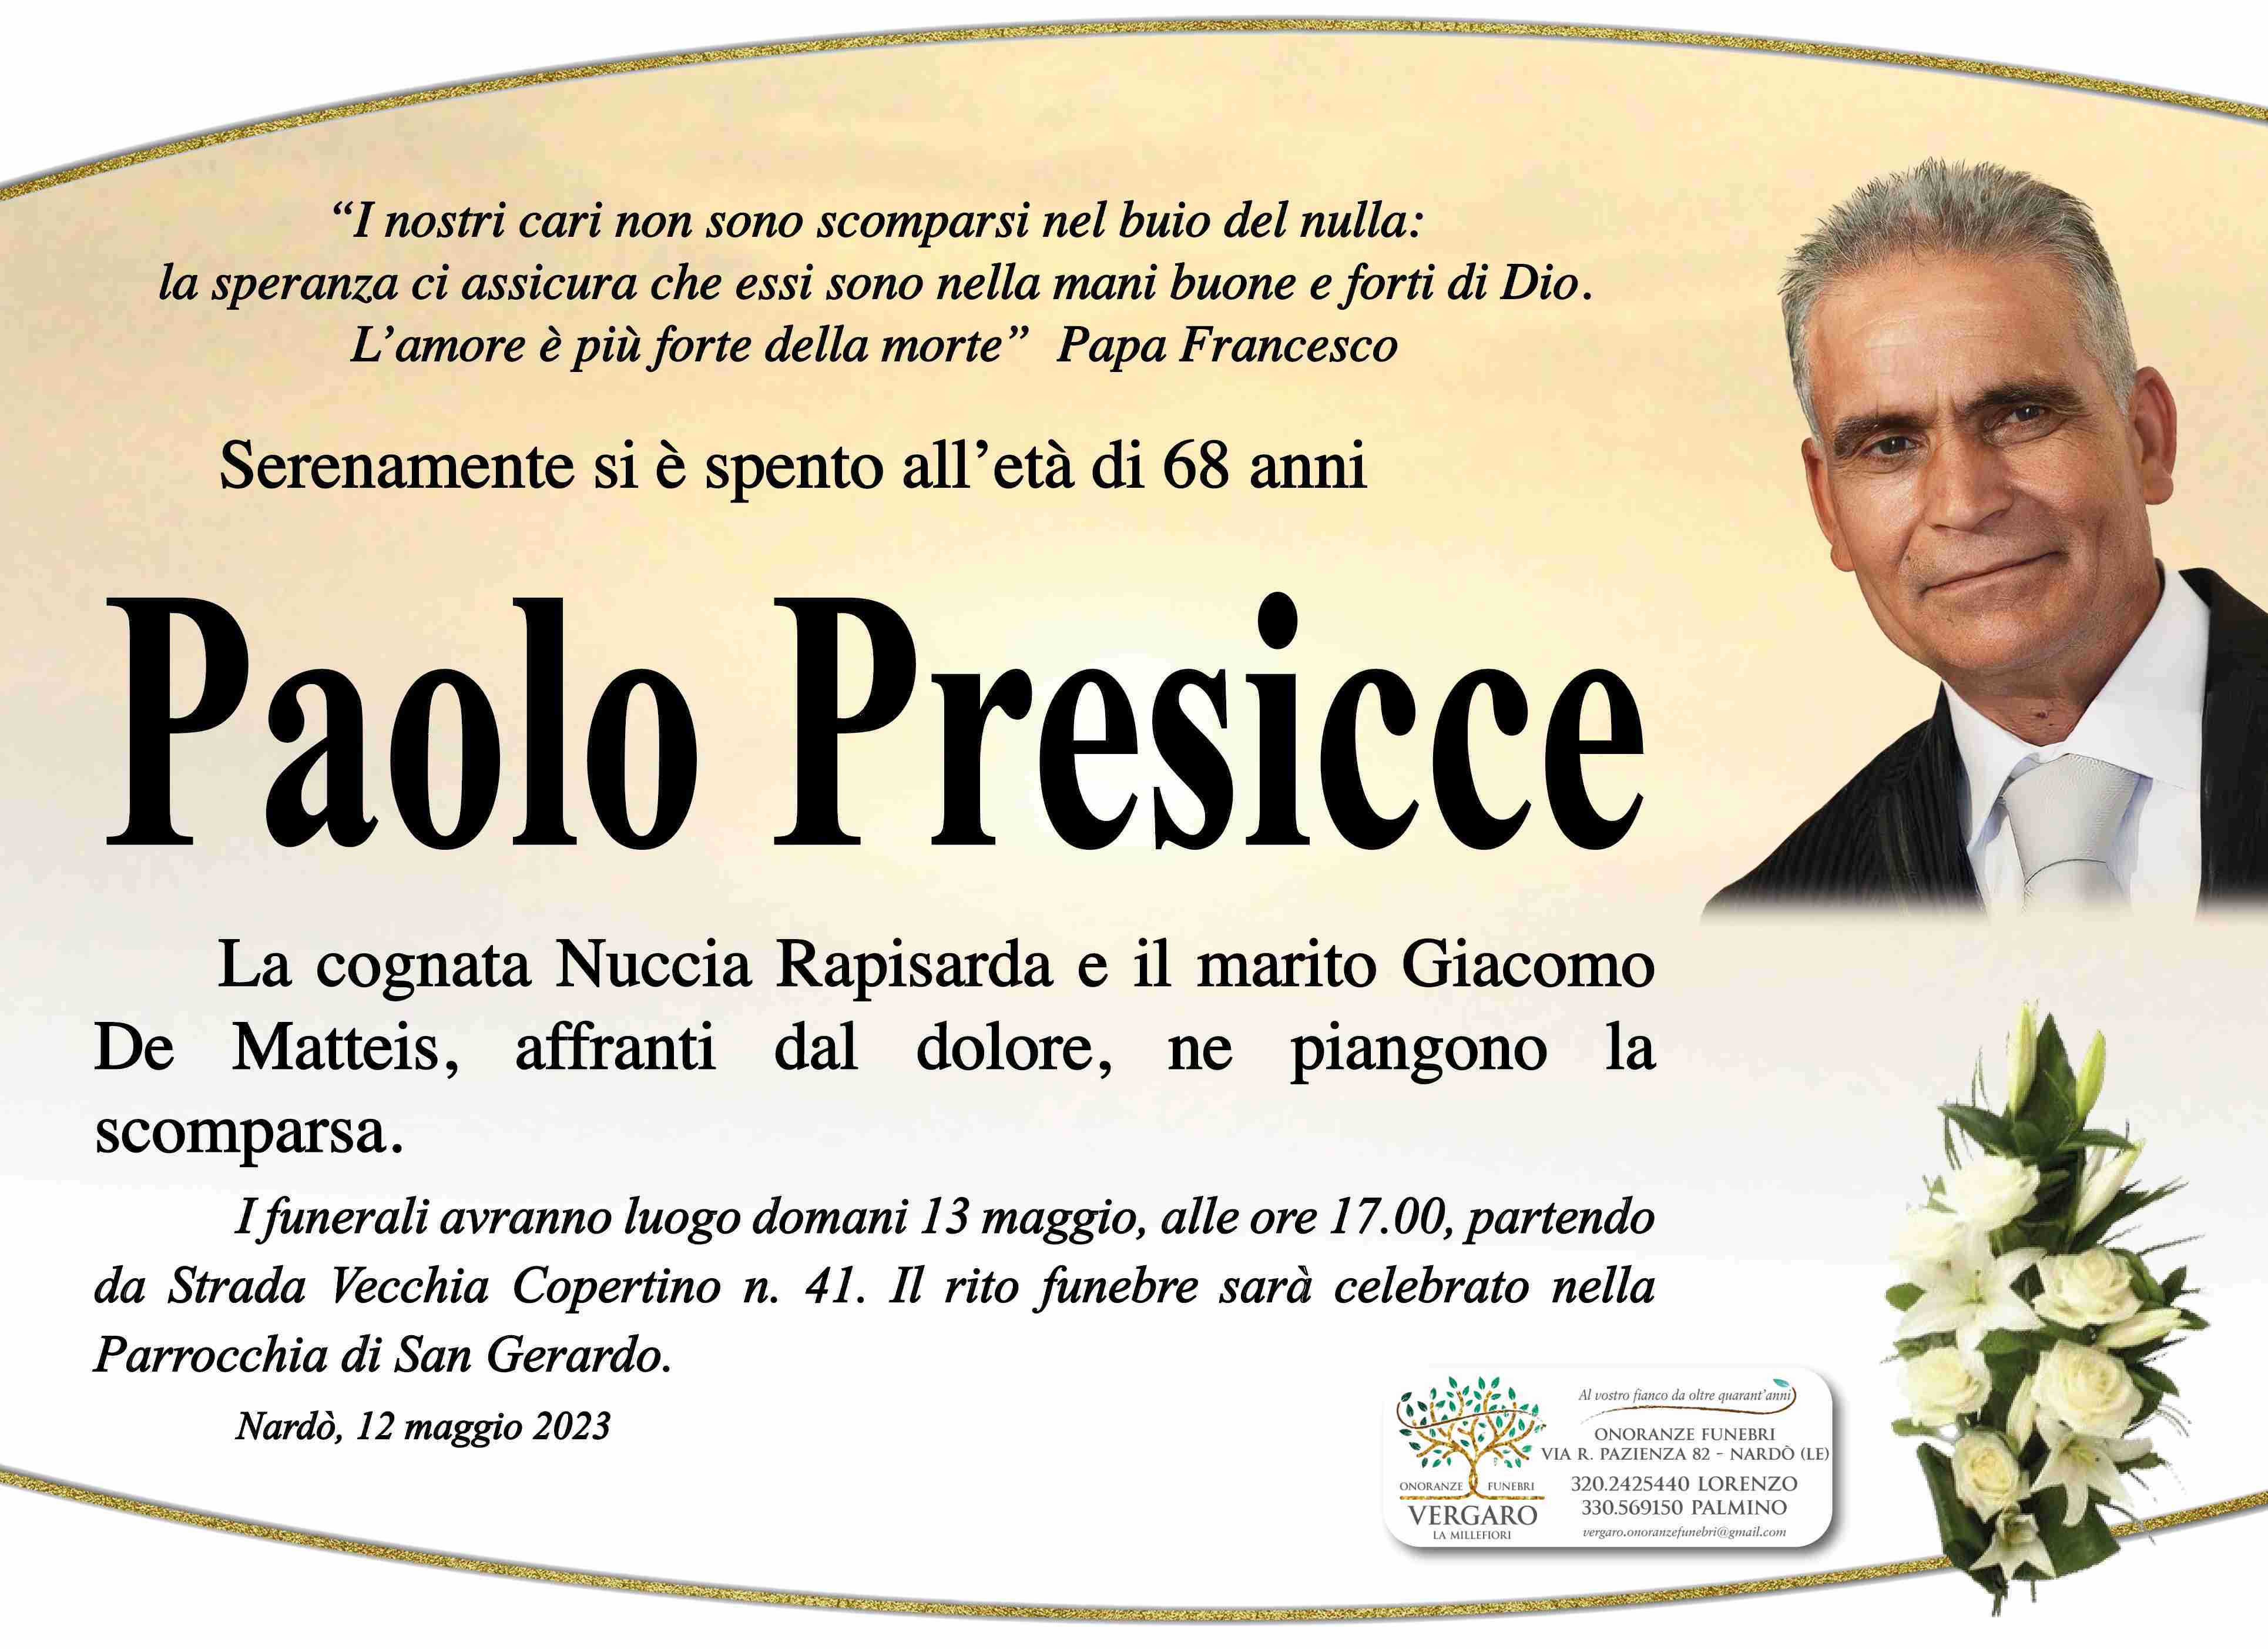 Paolo Presicce